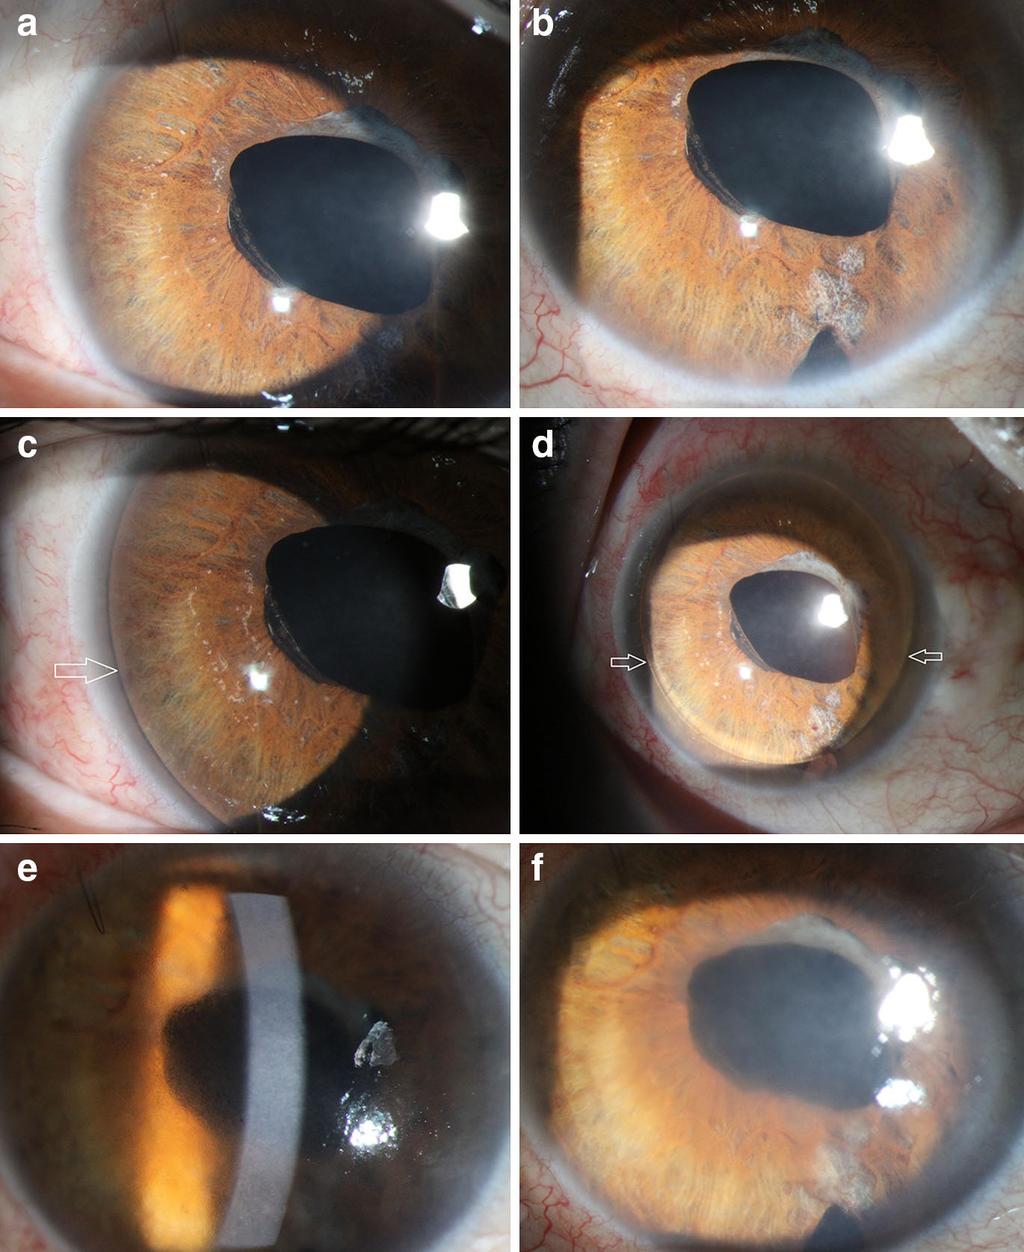 914 Int Ophthalmol (2014) 34:913 917 diabetic retinopathy in the right eye.